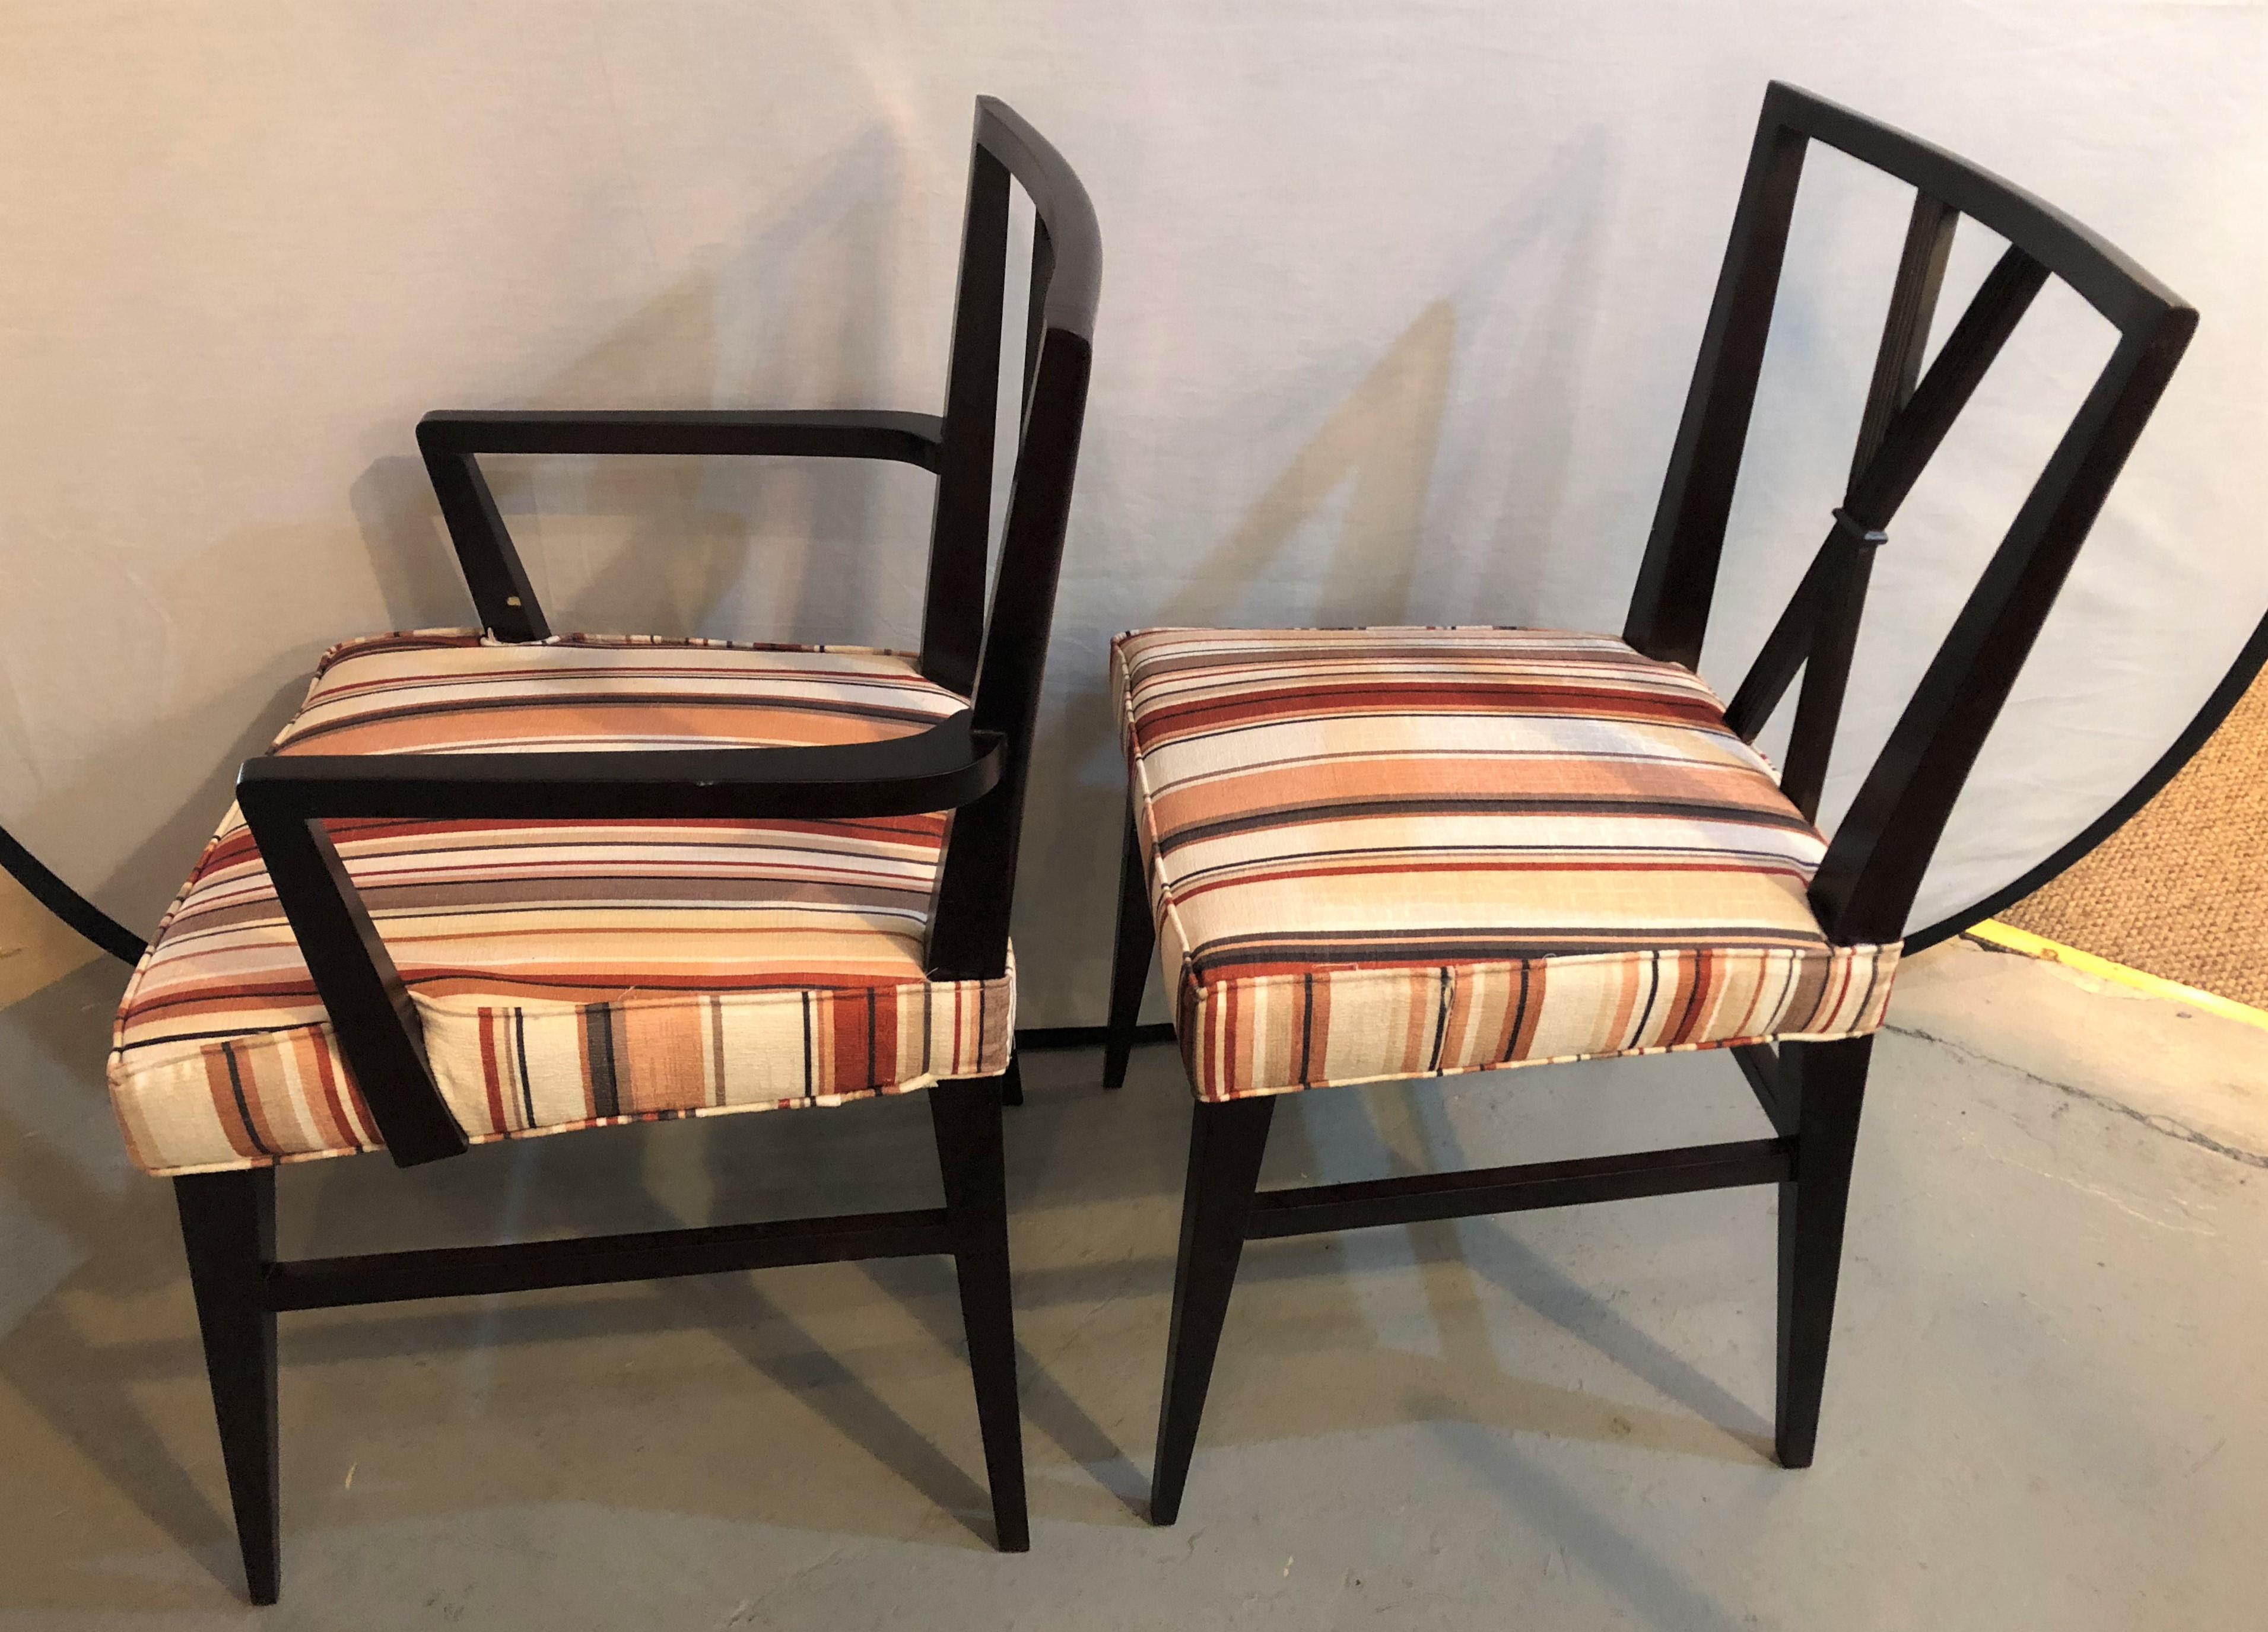 Set of ten Tommi Parzinger attributed dining chairs. Each in very nice condition with new upholstery. The set with X backrests leading to overstuffed and very comfortable seat rests on sprayed legs. All strong and sturdy.
The arm chairs measure